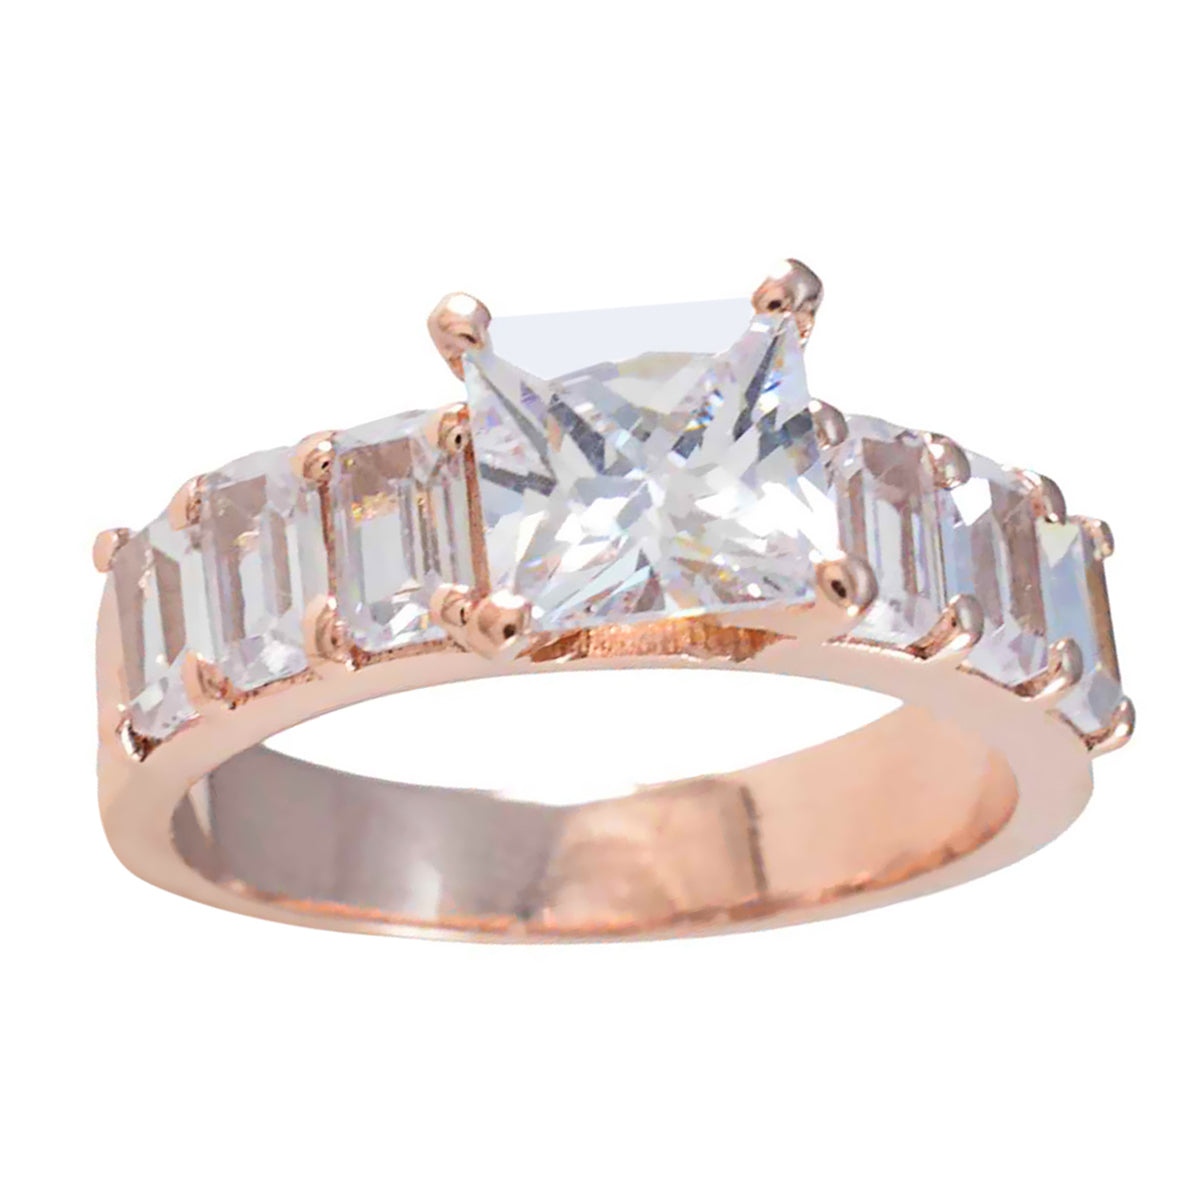 Riyo Indian Silver Ring With Rose Gold Plating White CZ Stone square Shape Prong Setting  Jewelry Fathers Day Ring